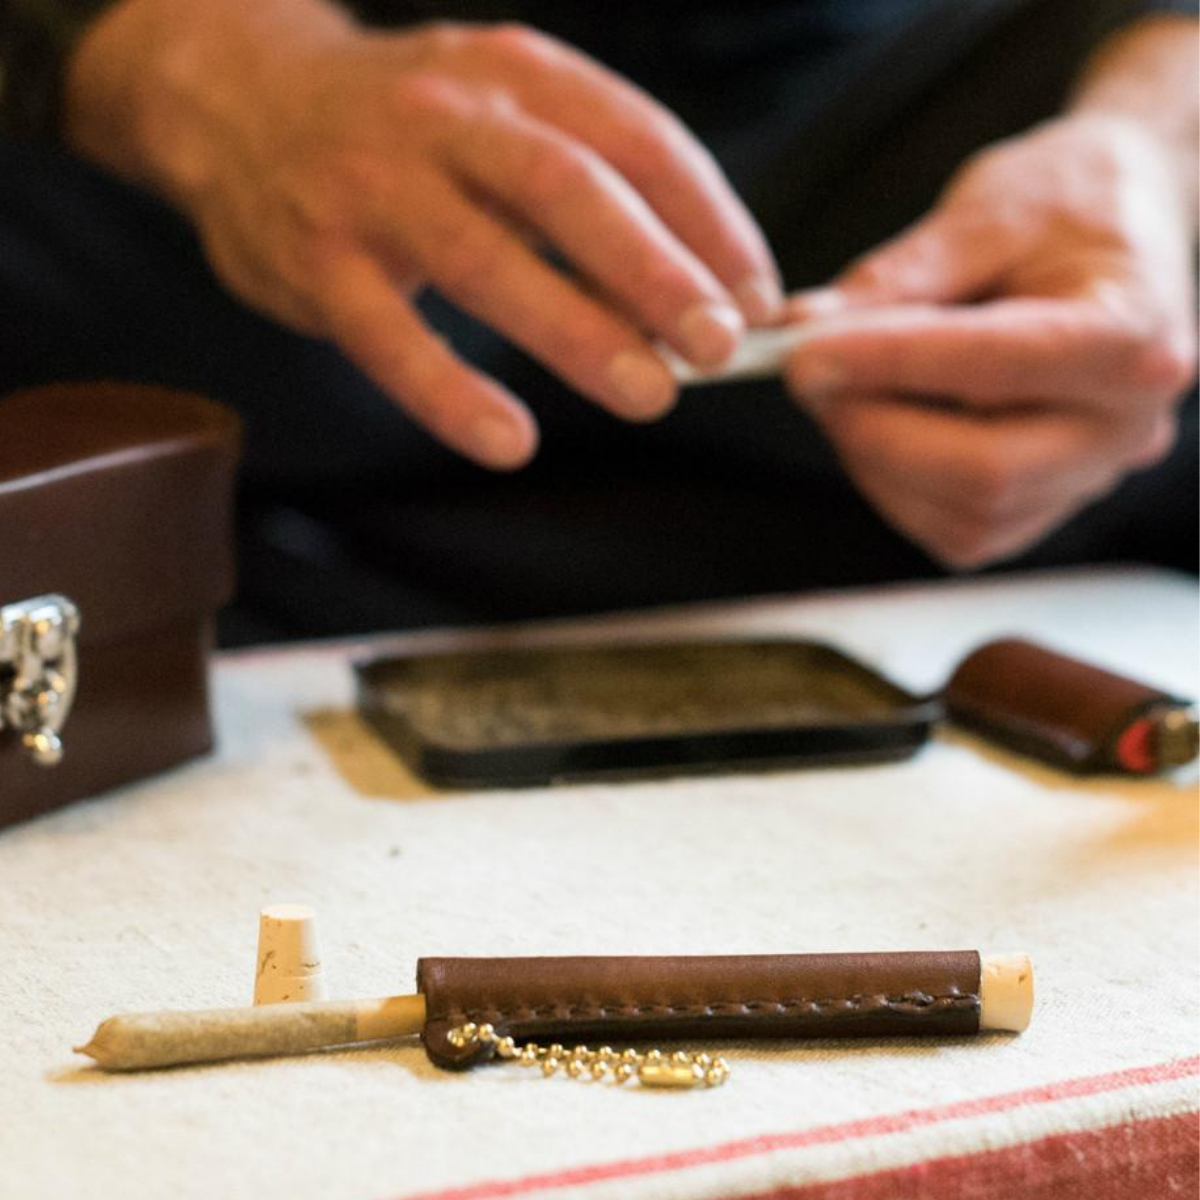 Man rolling a cigarette next to a leather &quot;Classy Stash&quot; box and leather lighter holder